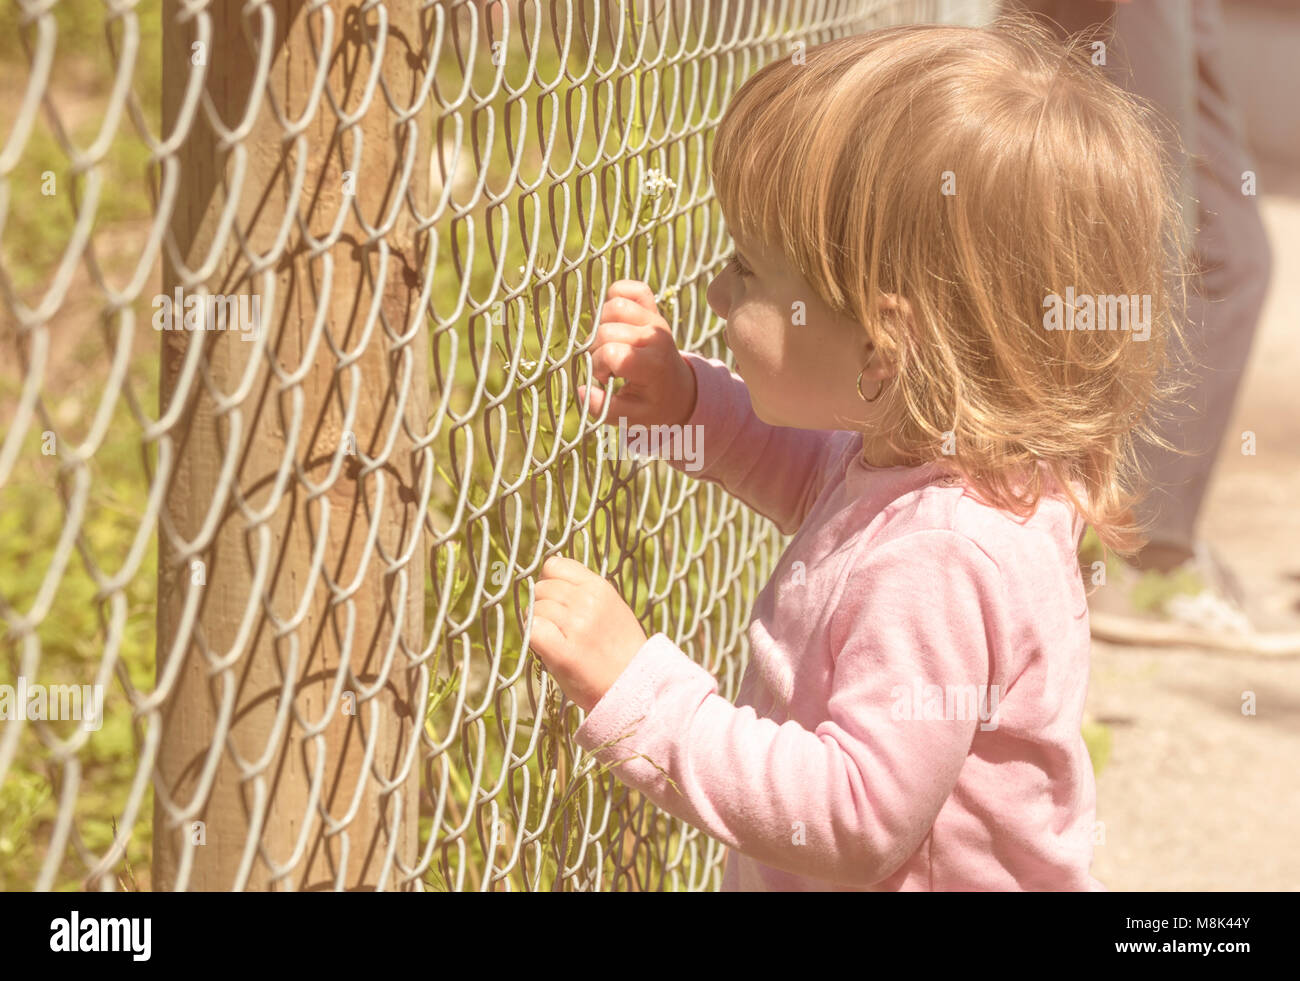 Little blonde girl holding with both hands a metal fence on a beautiful sunny day Stock Photo